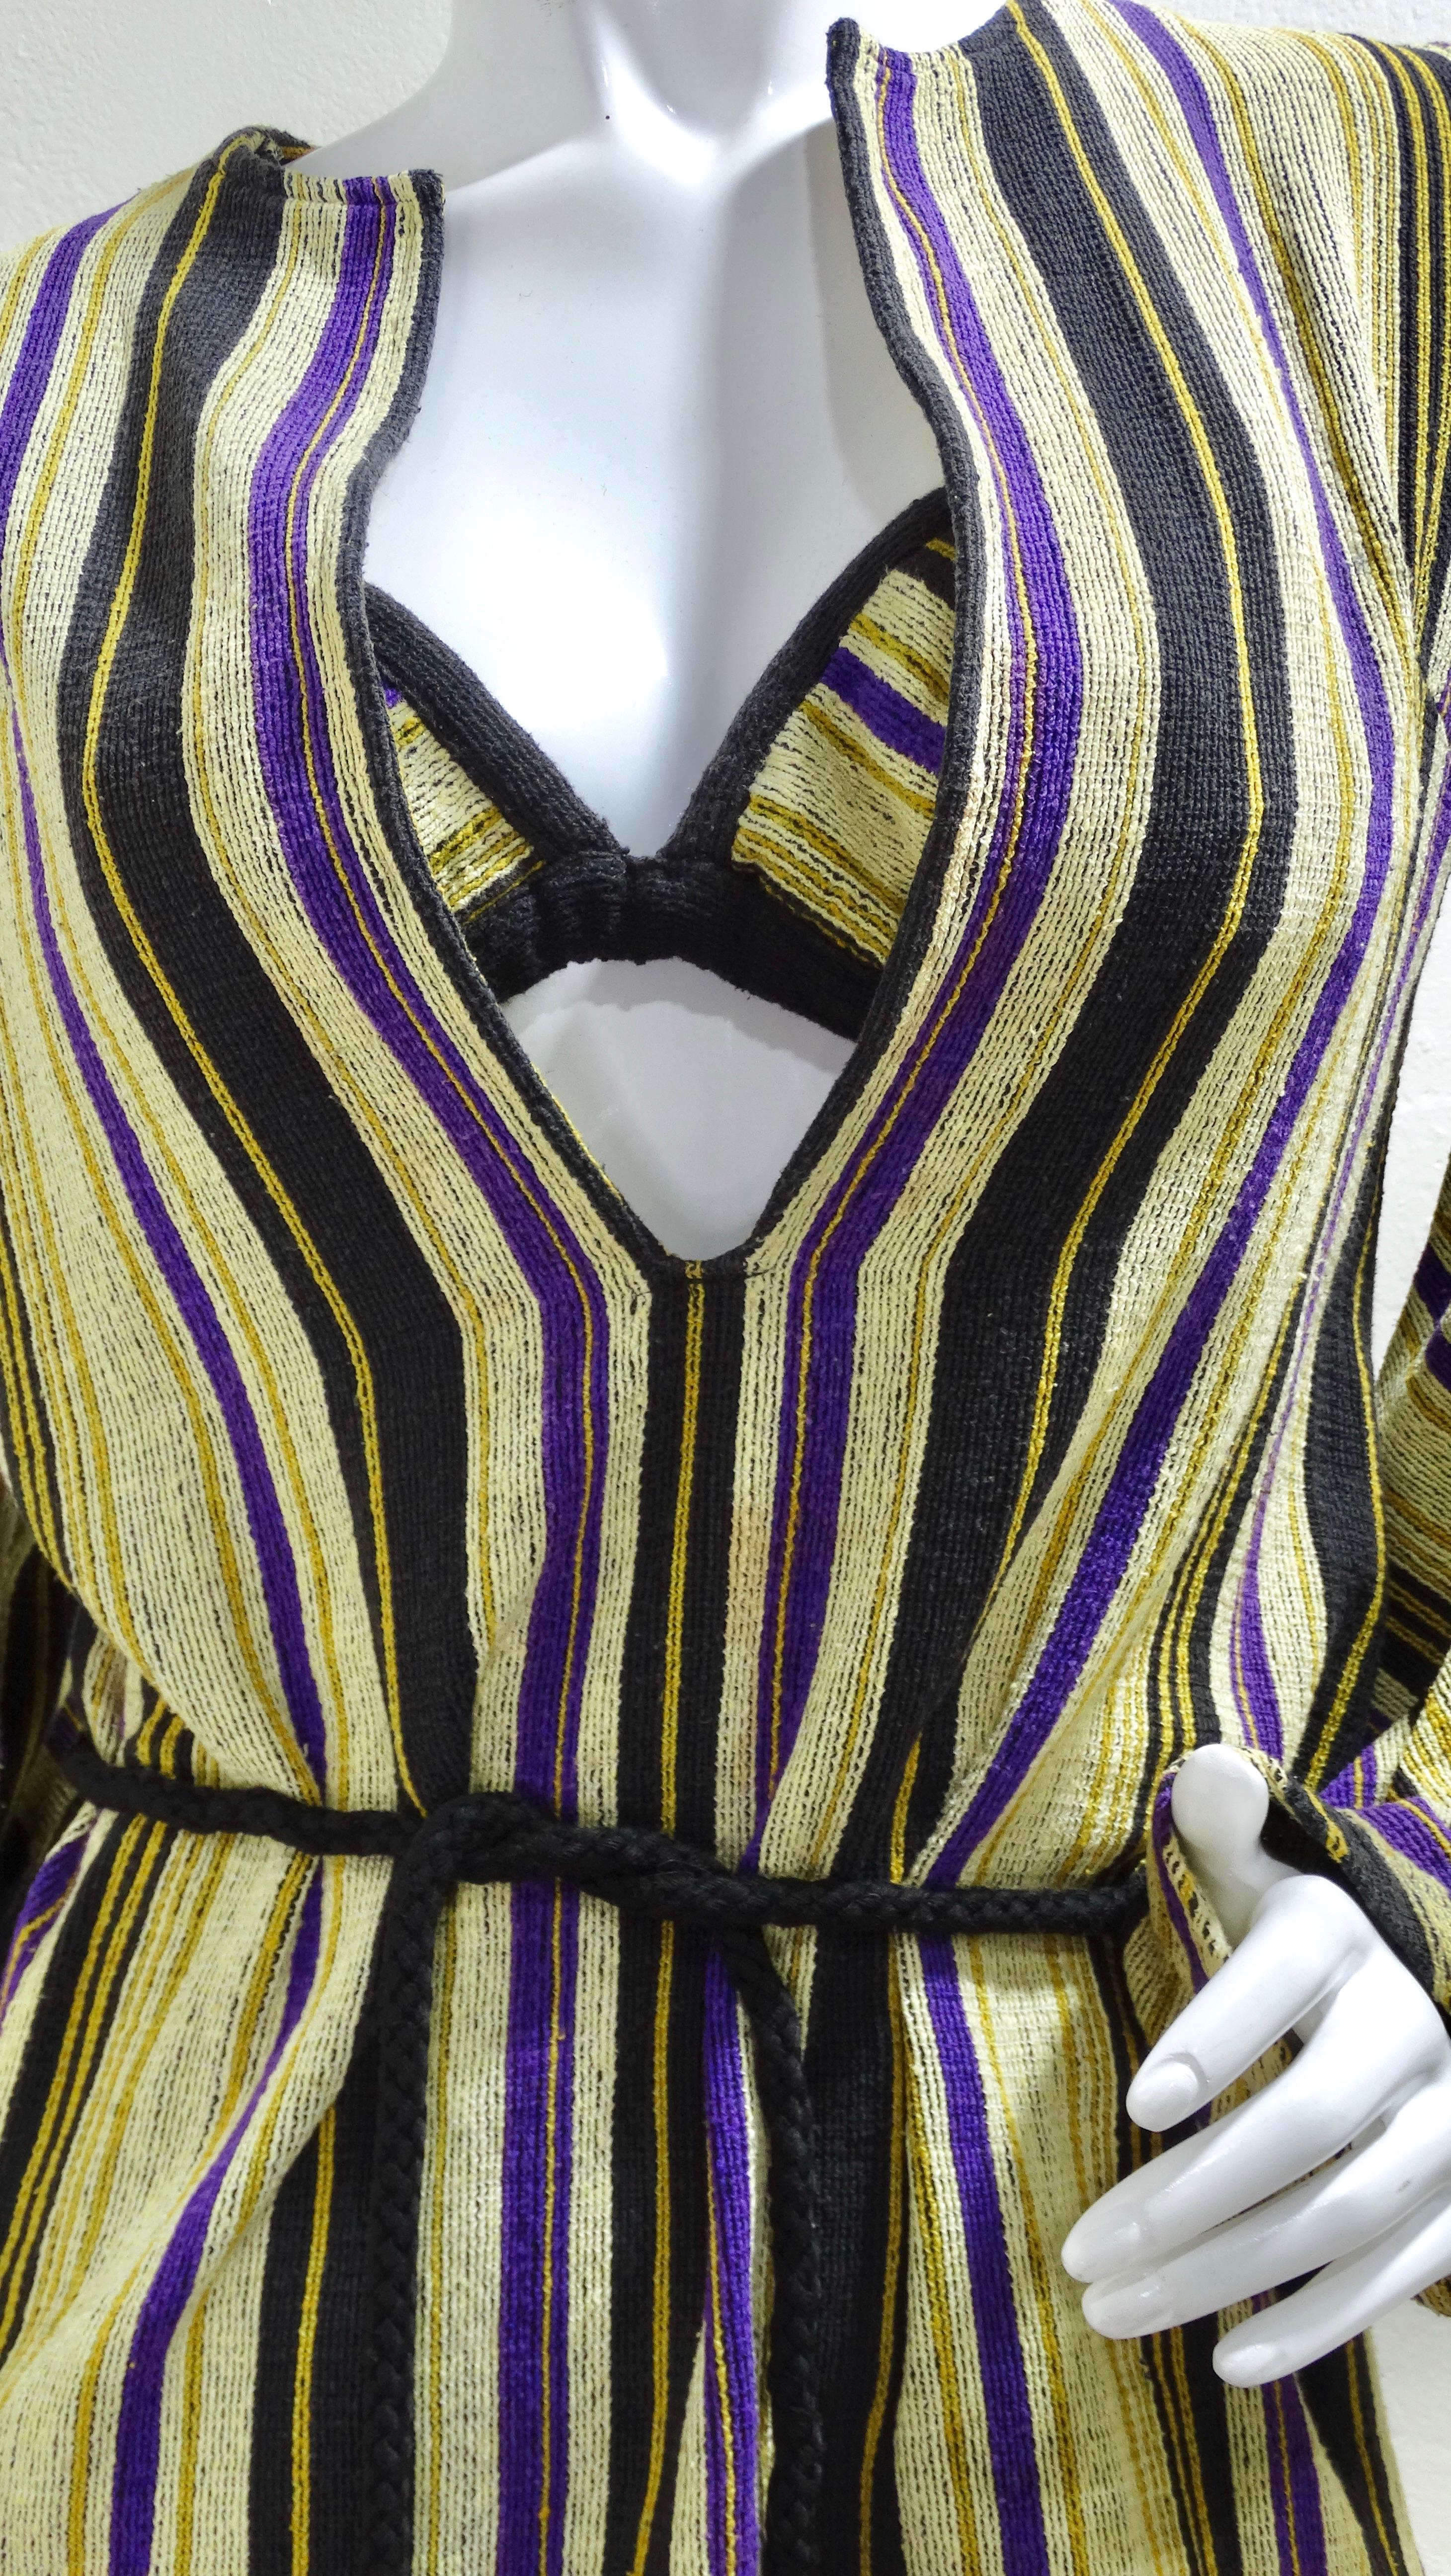 Rikma Angel Wing 1970's Striped Dress In Good Condition For Sale In Scottsdale, AZ